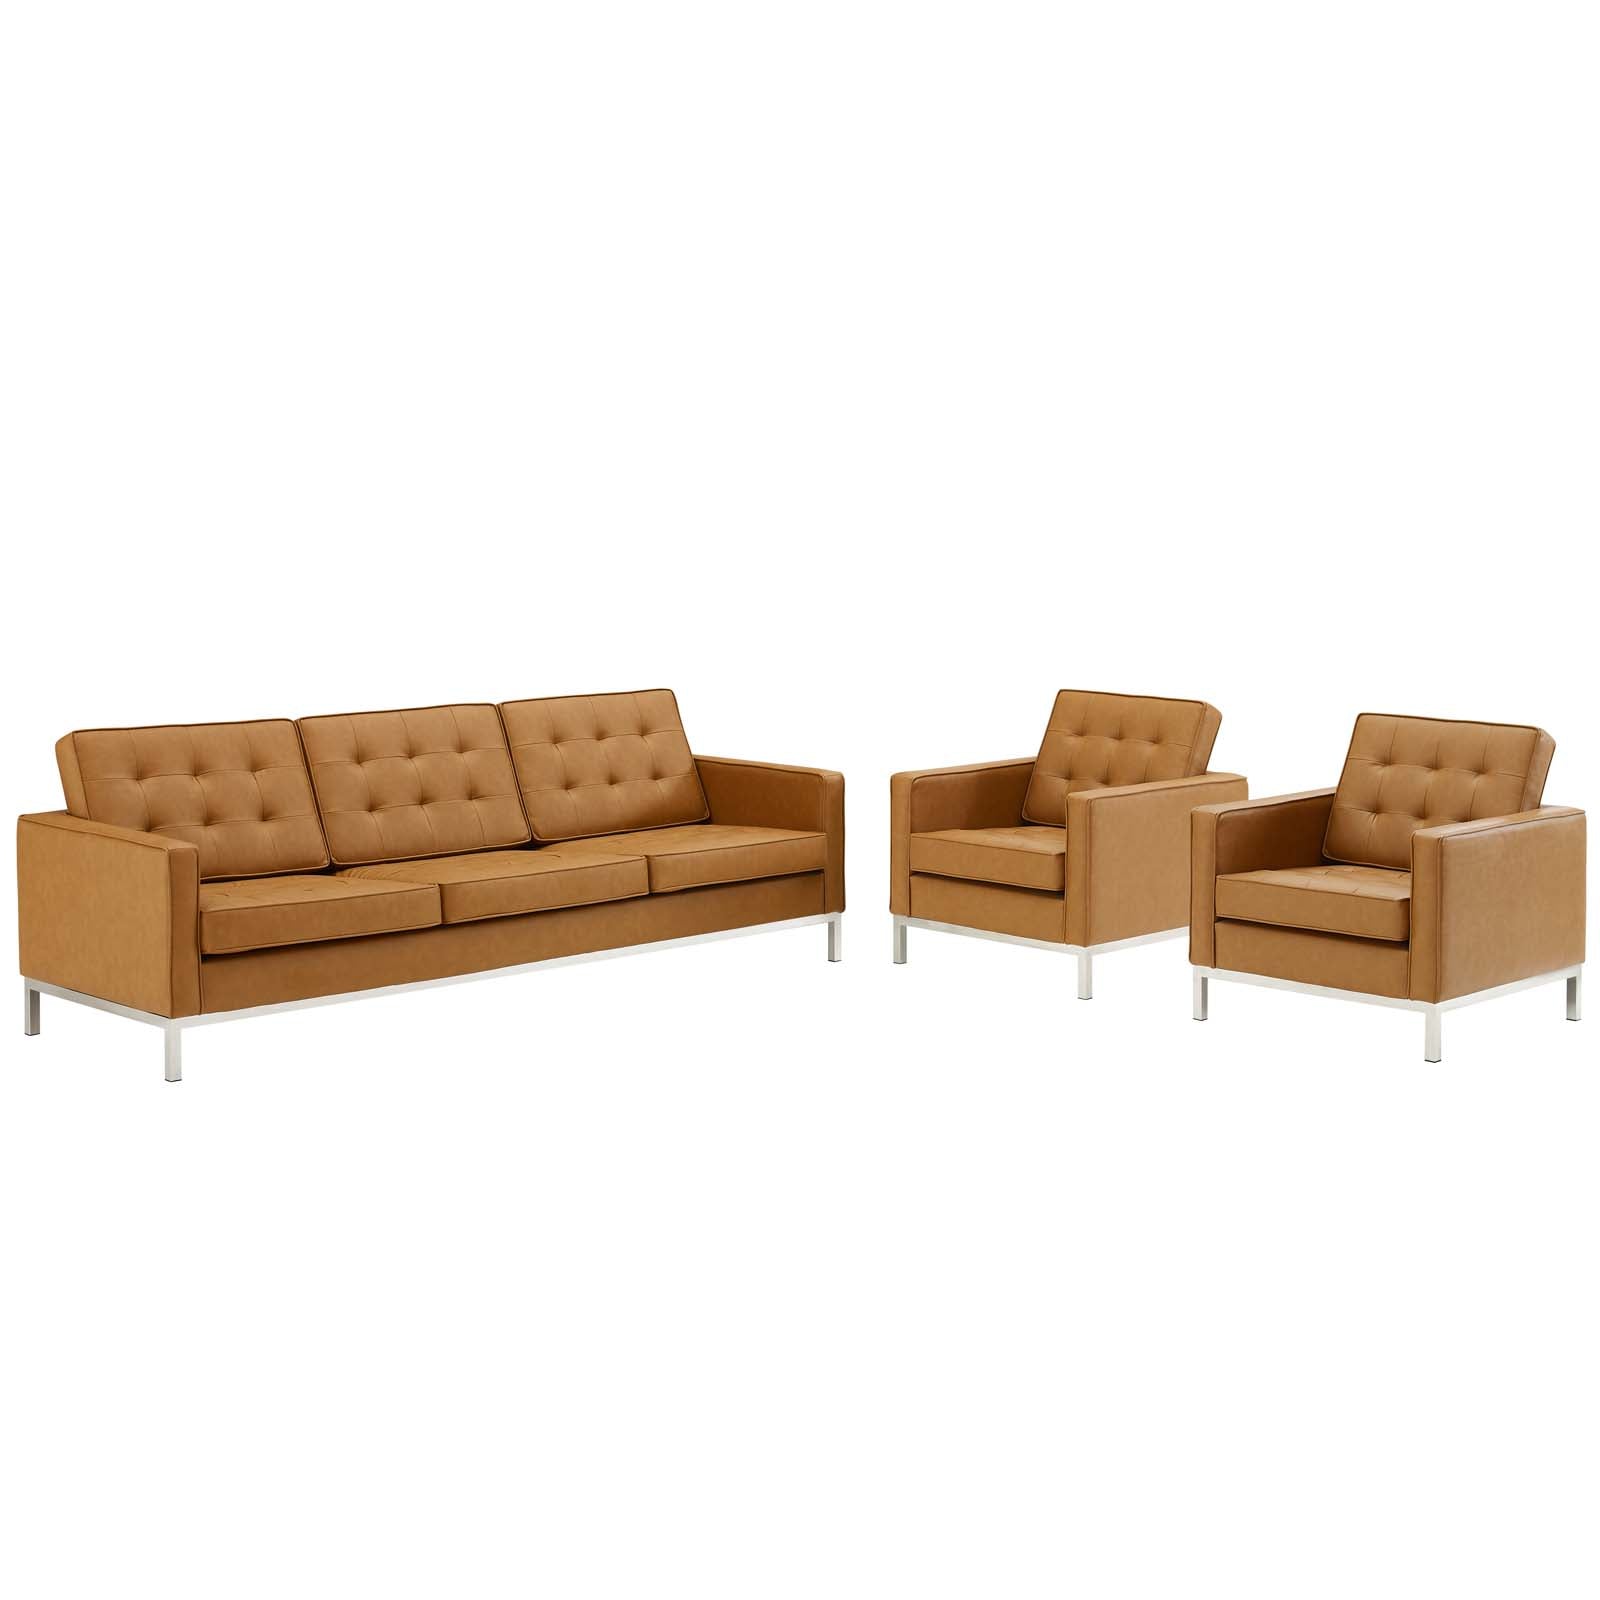 Loft 3 Piece Tufted Upholstered Faux Leather Set